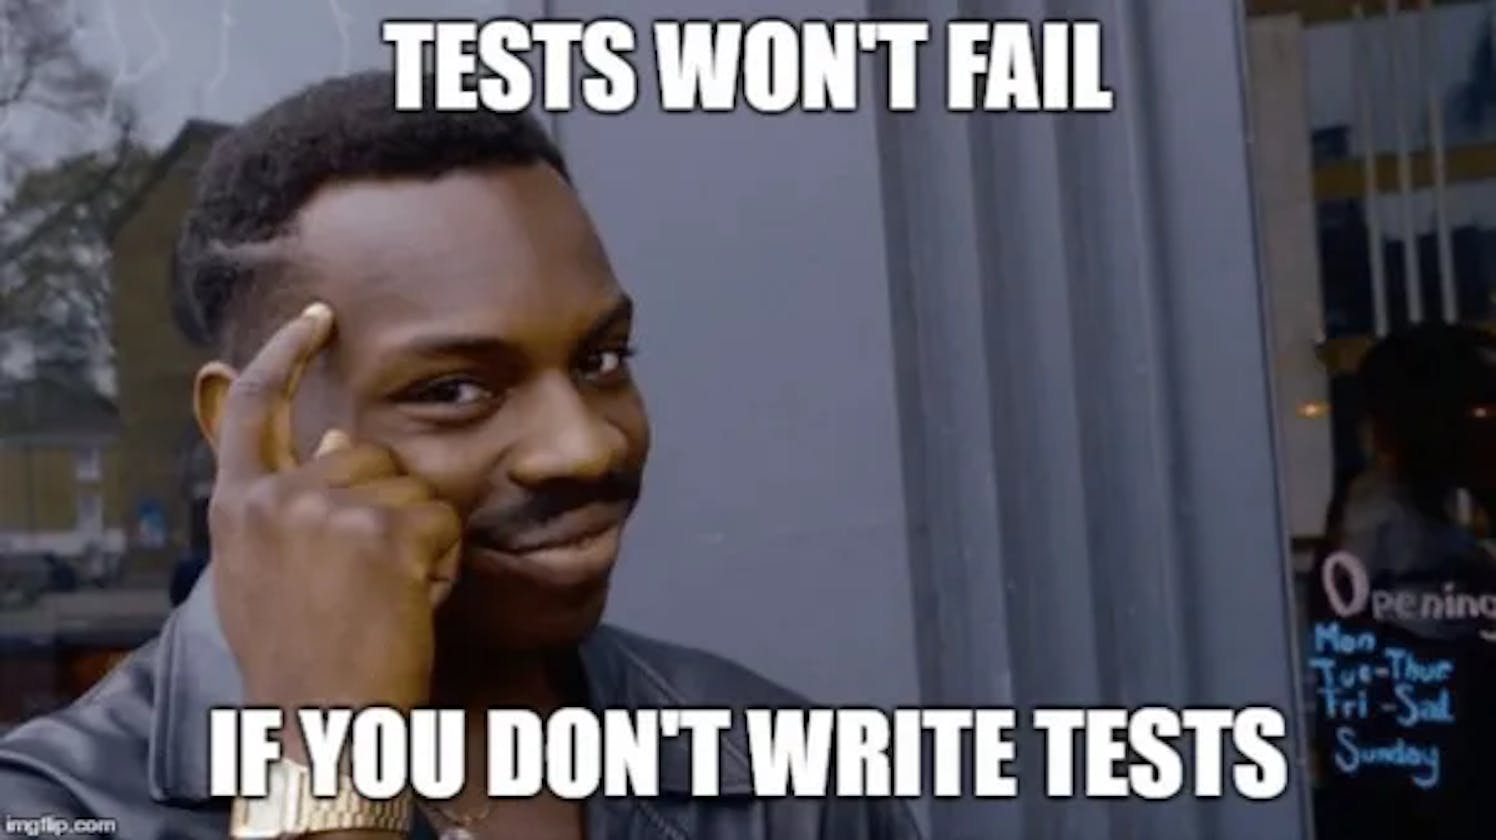 Getting faster with testing